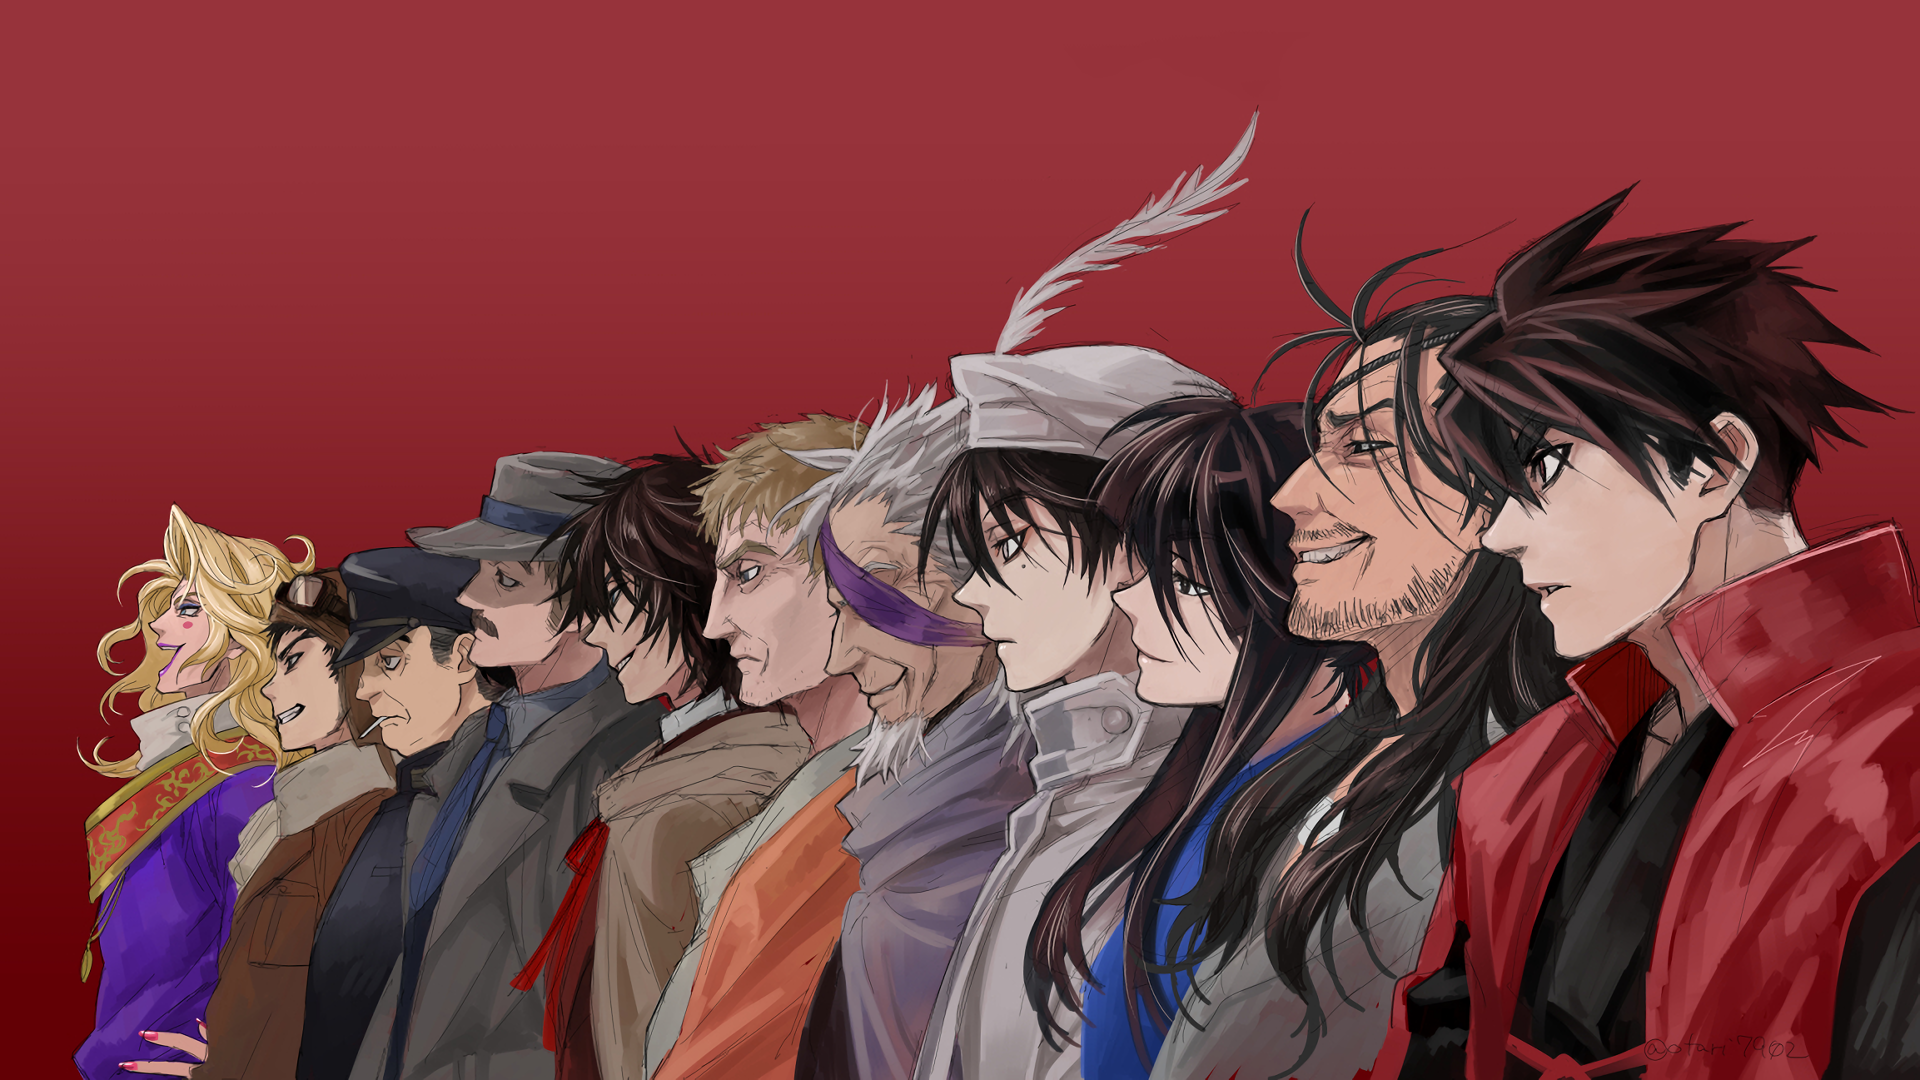 Anime Drifters HD Wallpaper | Background Image